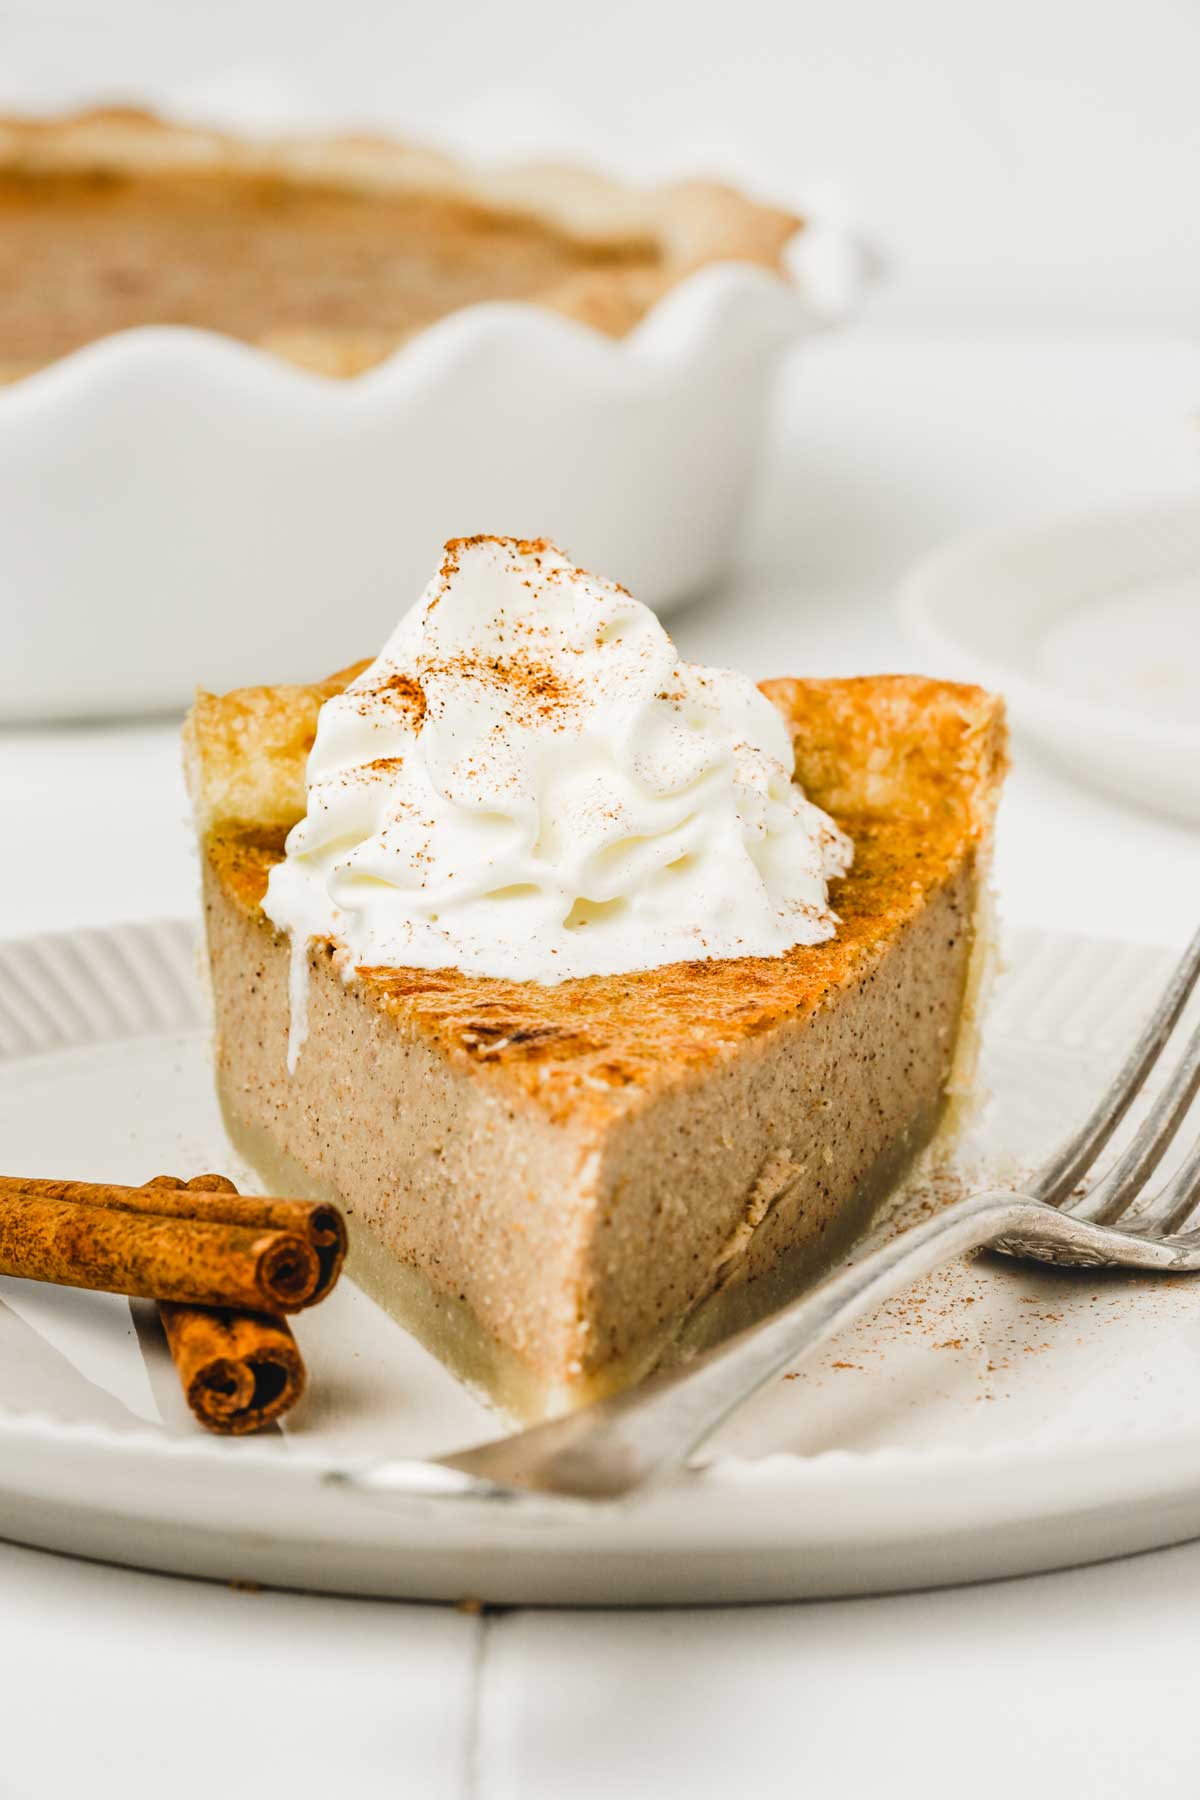 Cinnamon pie slice with whipped cream on a plate